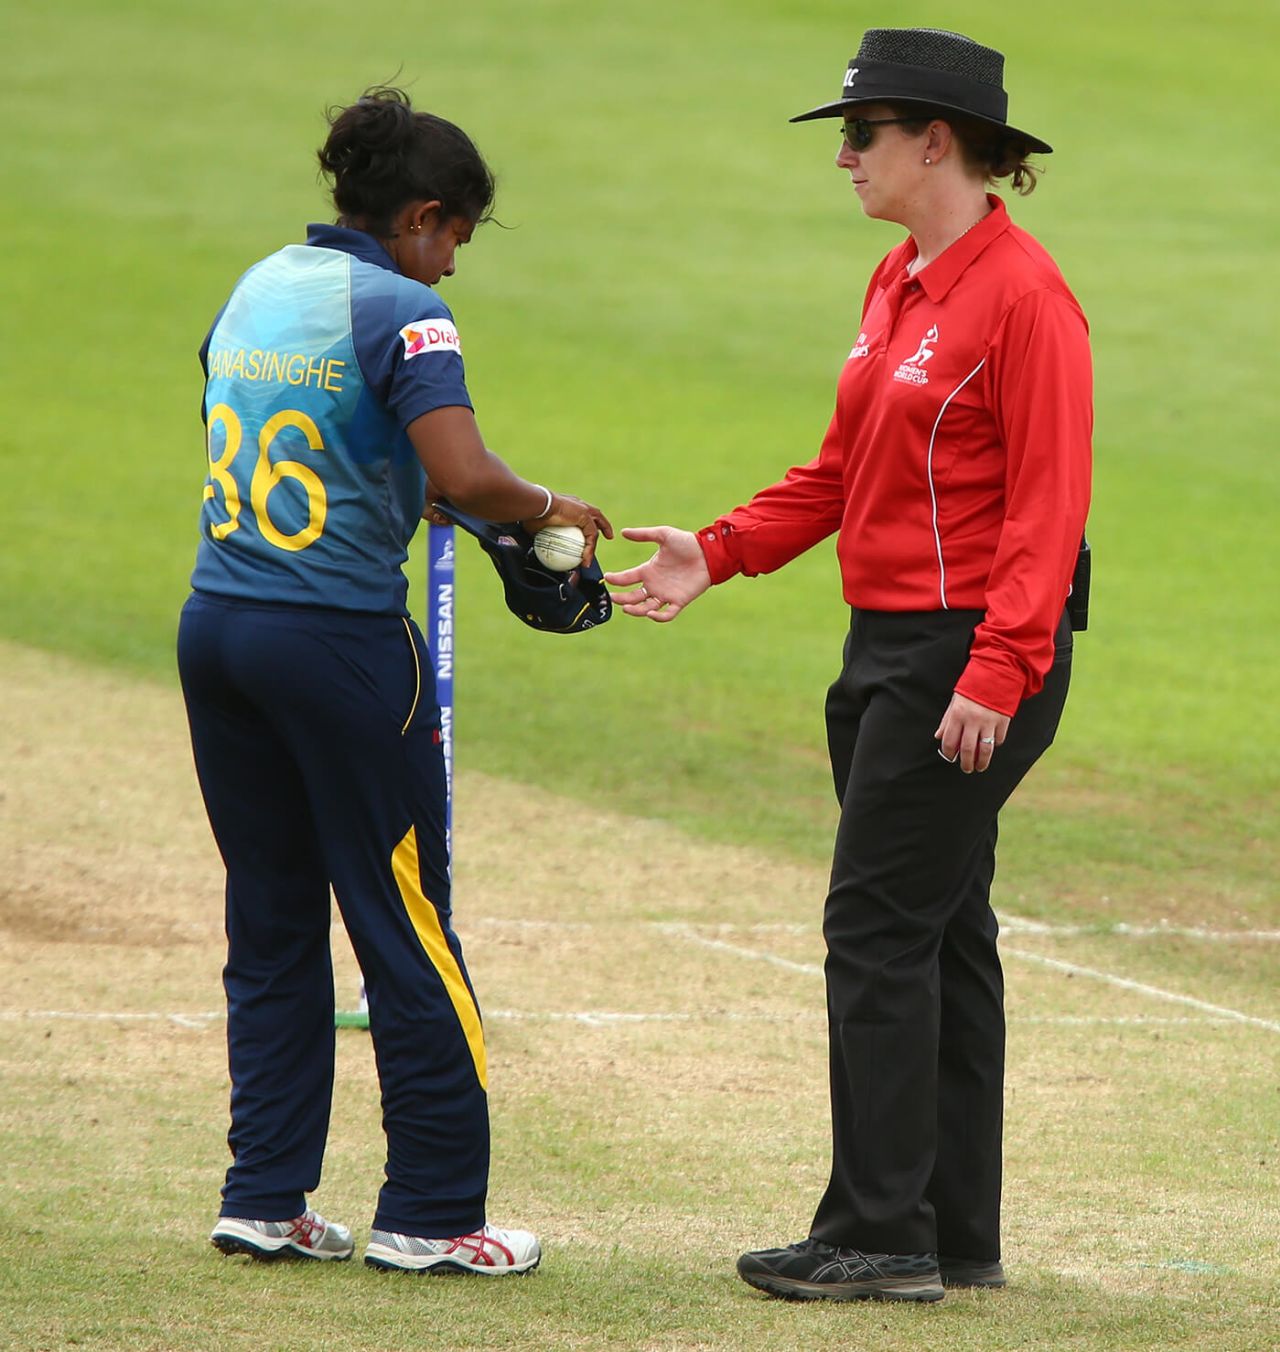 Umpire Claire Polosak takes the ball from Oshadi Ranasinghe, West Indies v Sri Lanka, Women's World Cup, July 9, 2017